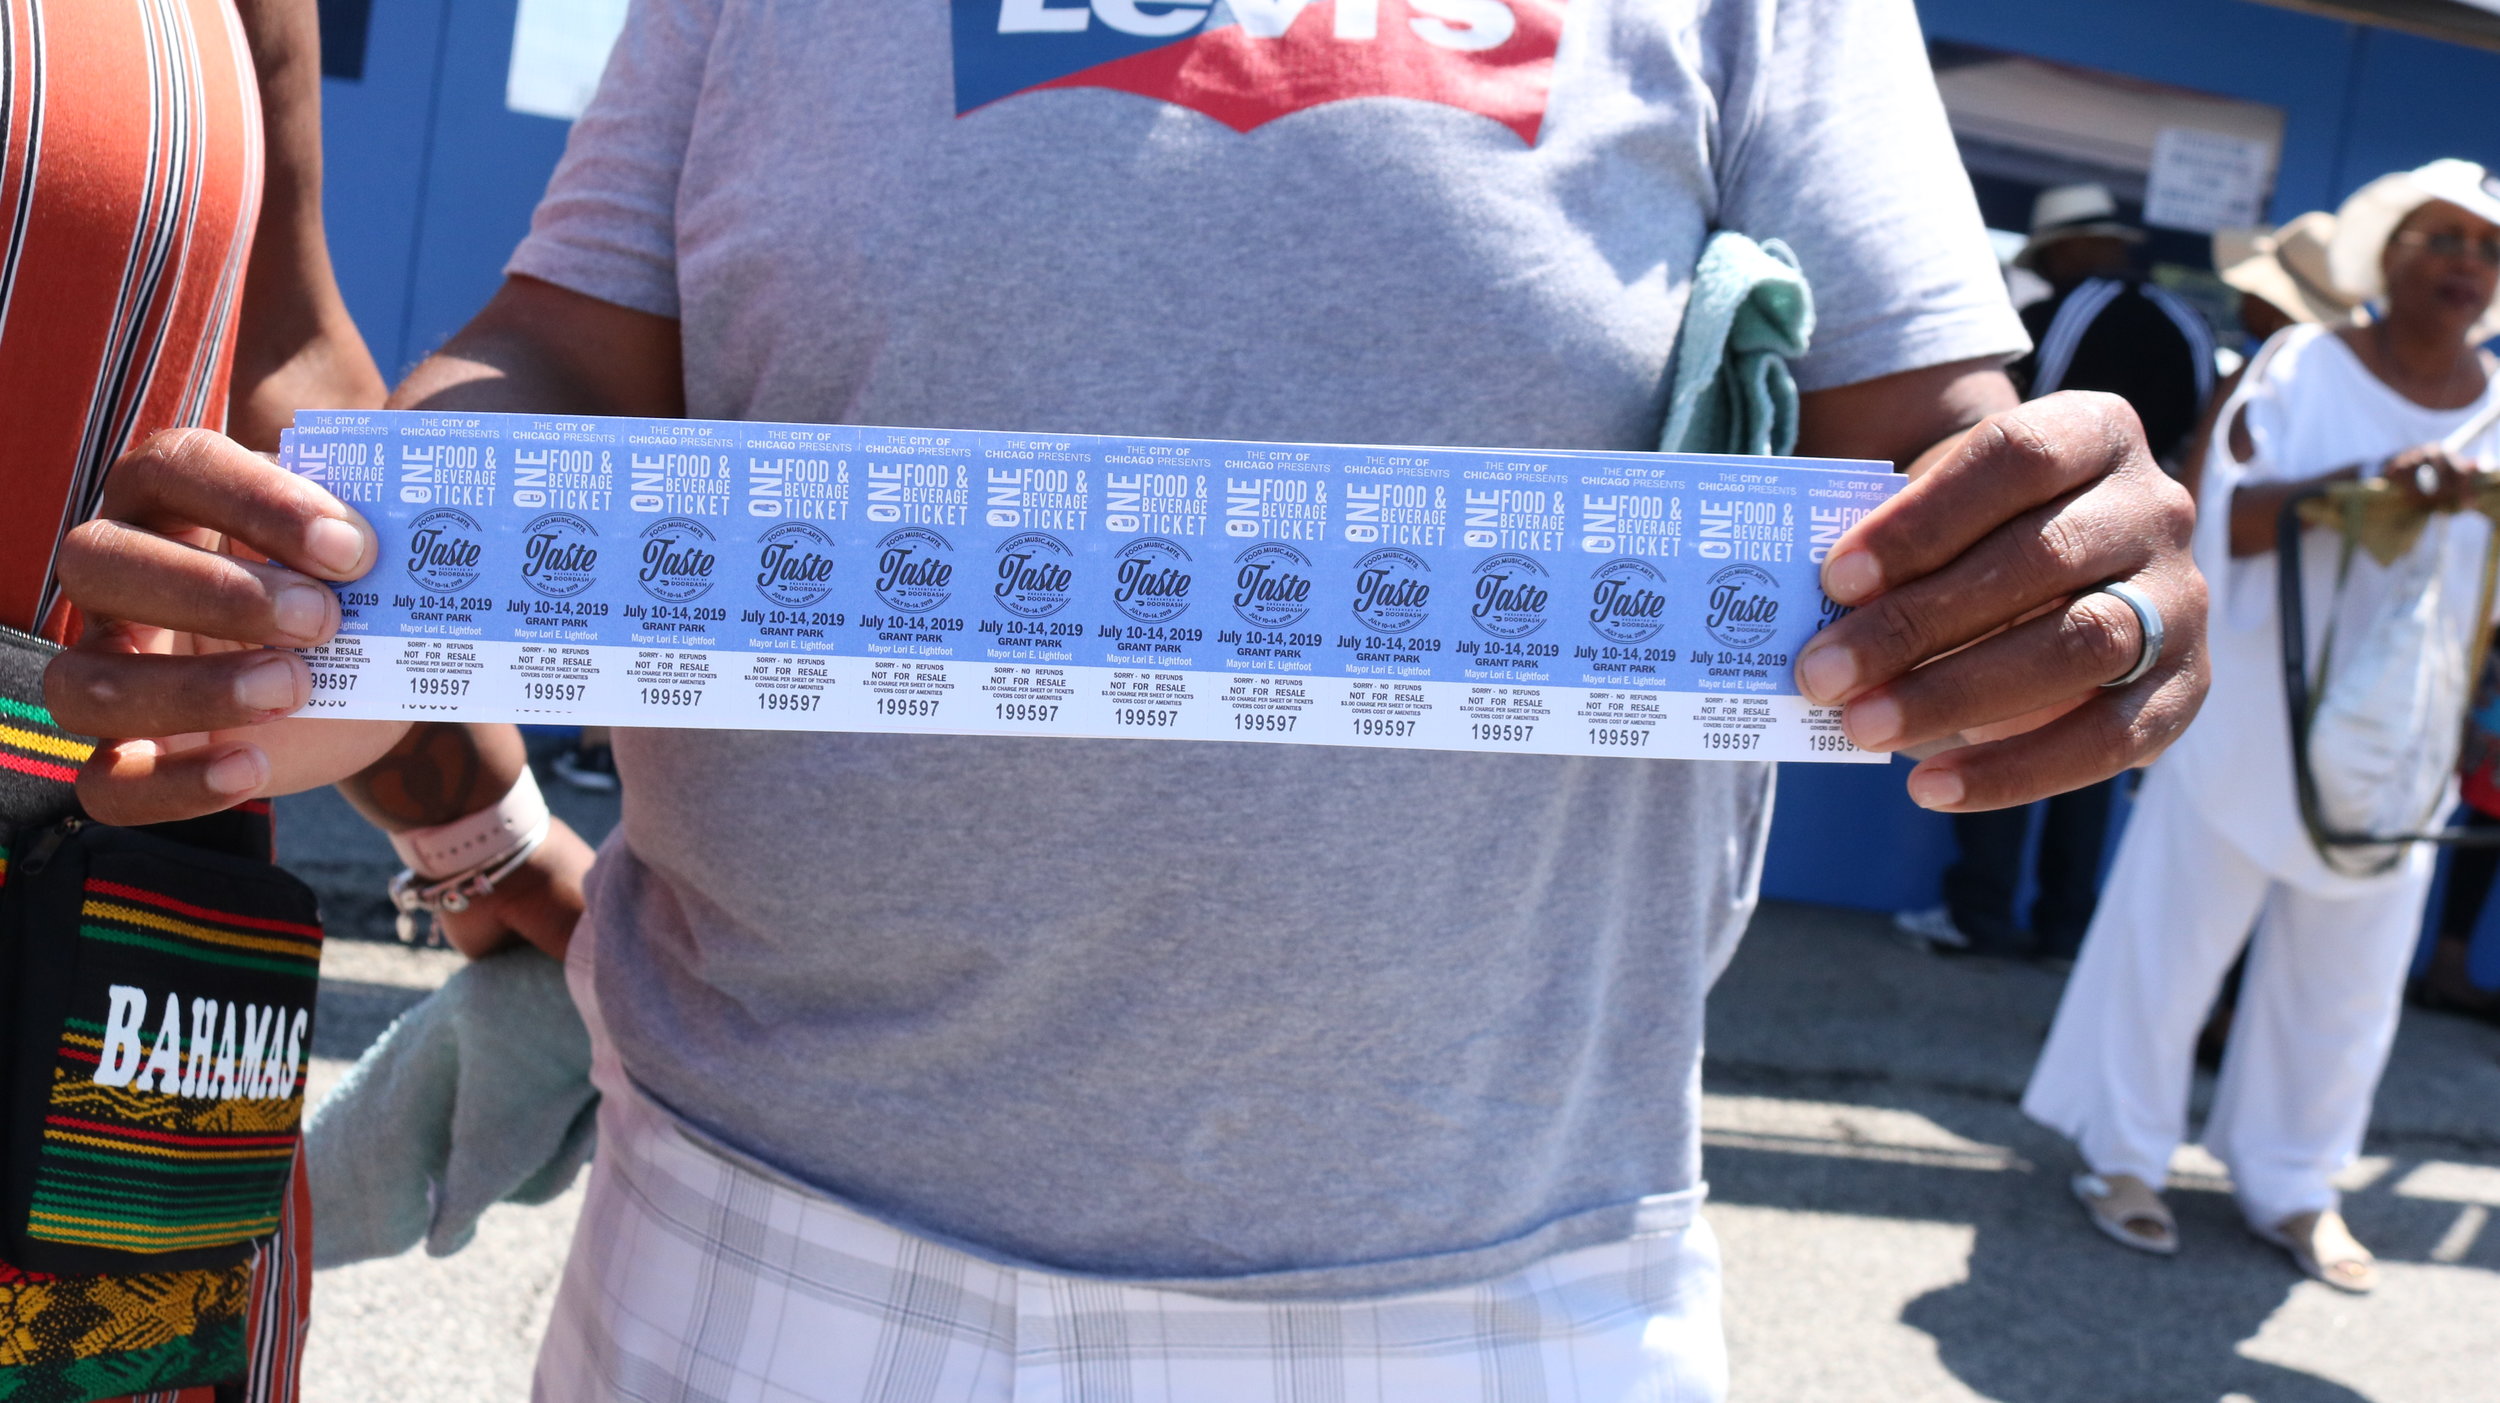  An attendee presenting his tickets at the Taste of Chicago. Photo by Clariza Adao 